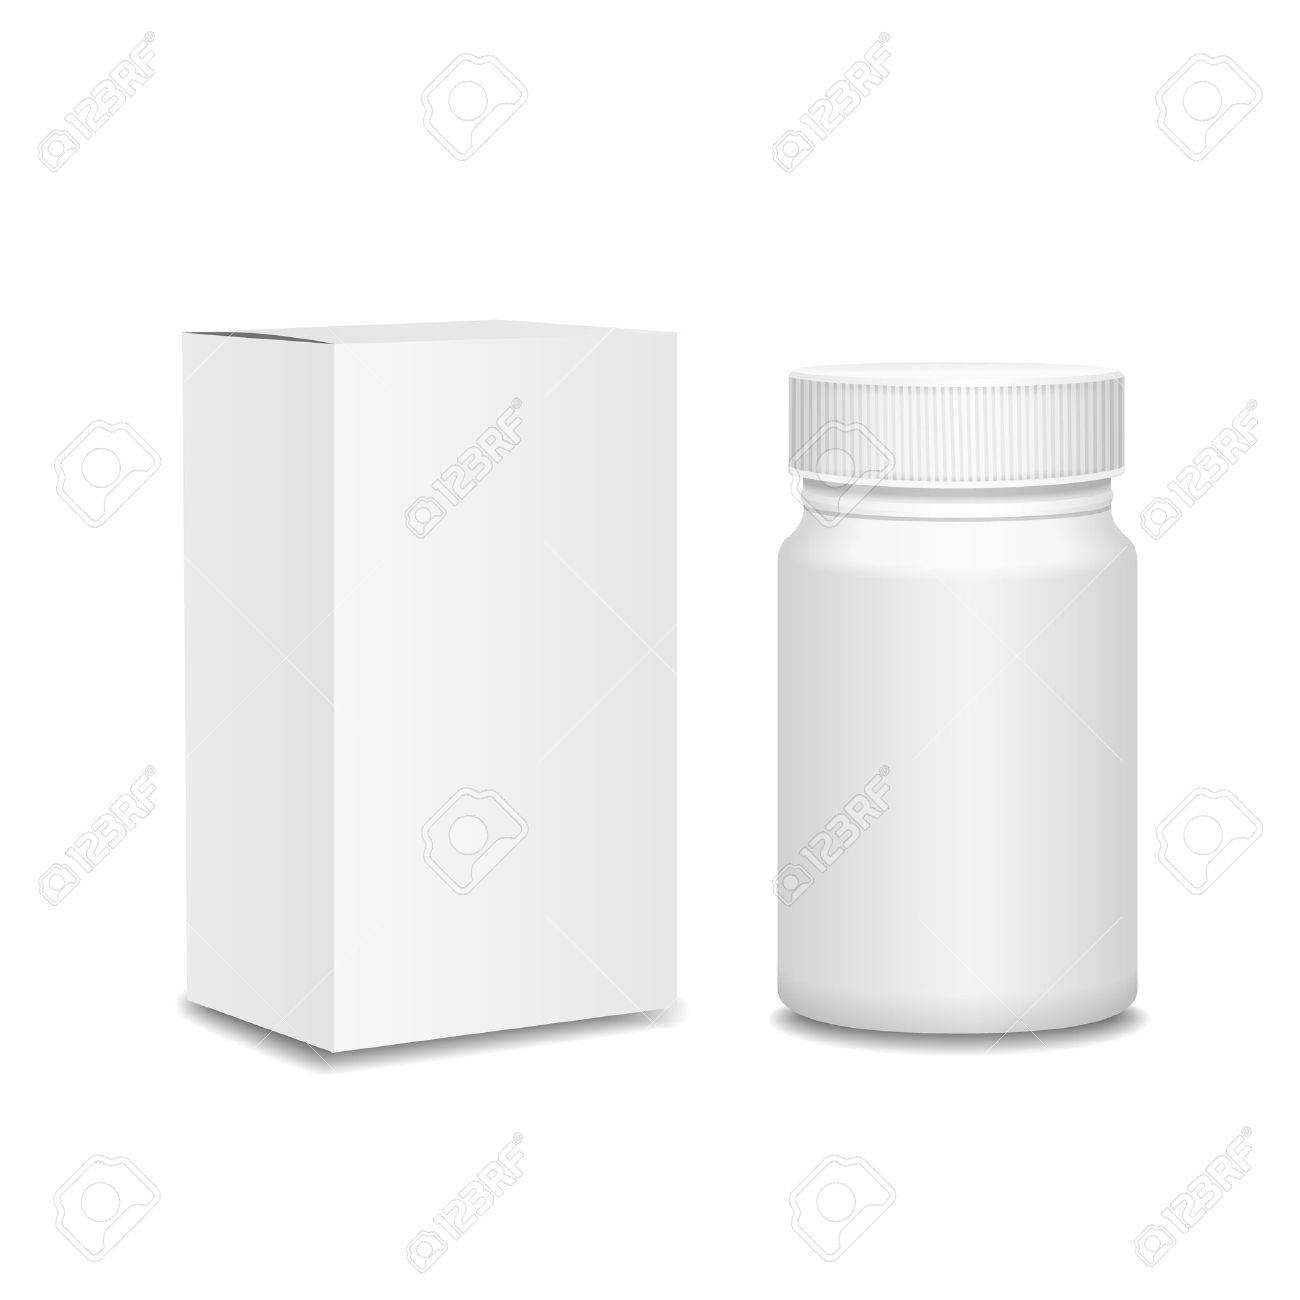 Blank Medicine Bottle And Cardboard Packaging, Vitamins, Examples.. Within Blank Packaging Templates